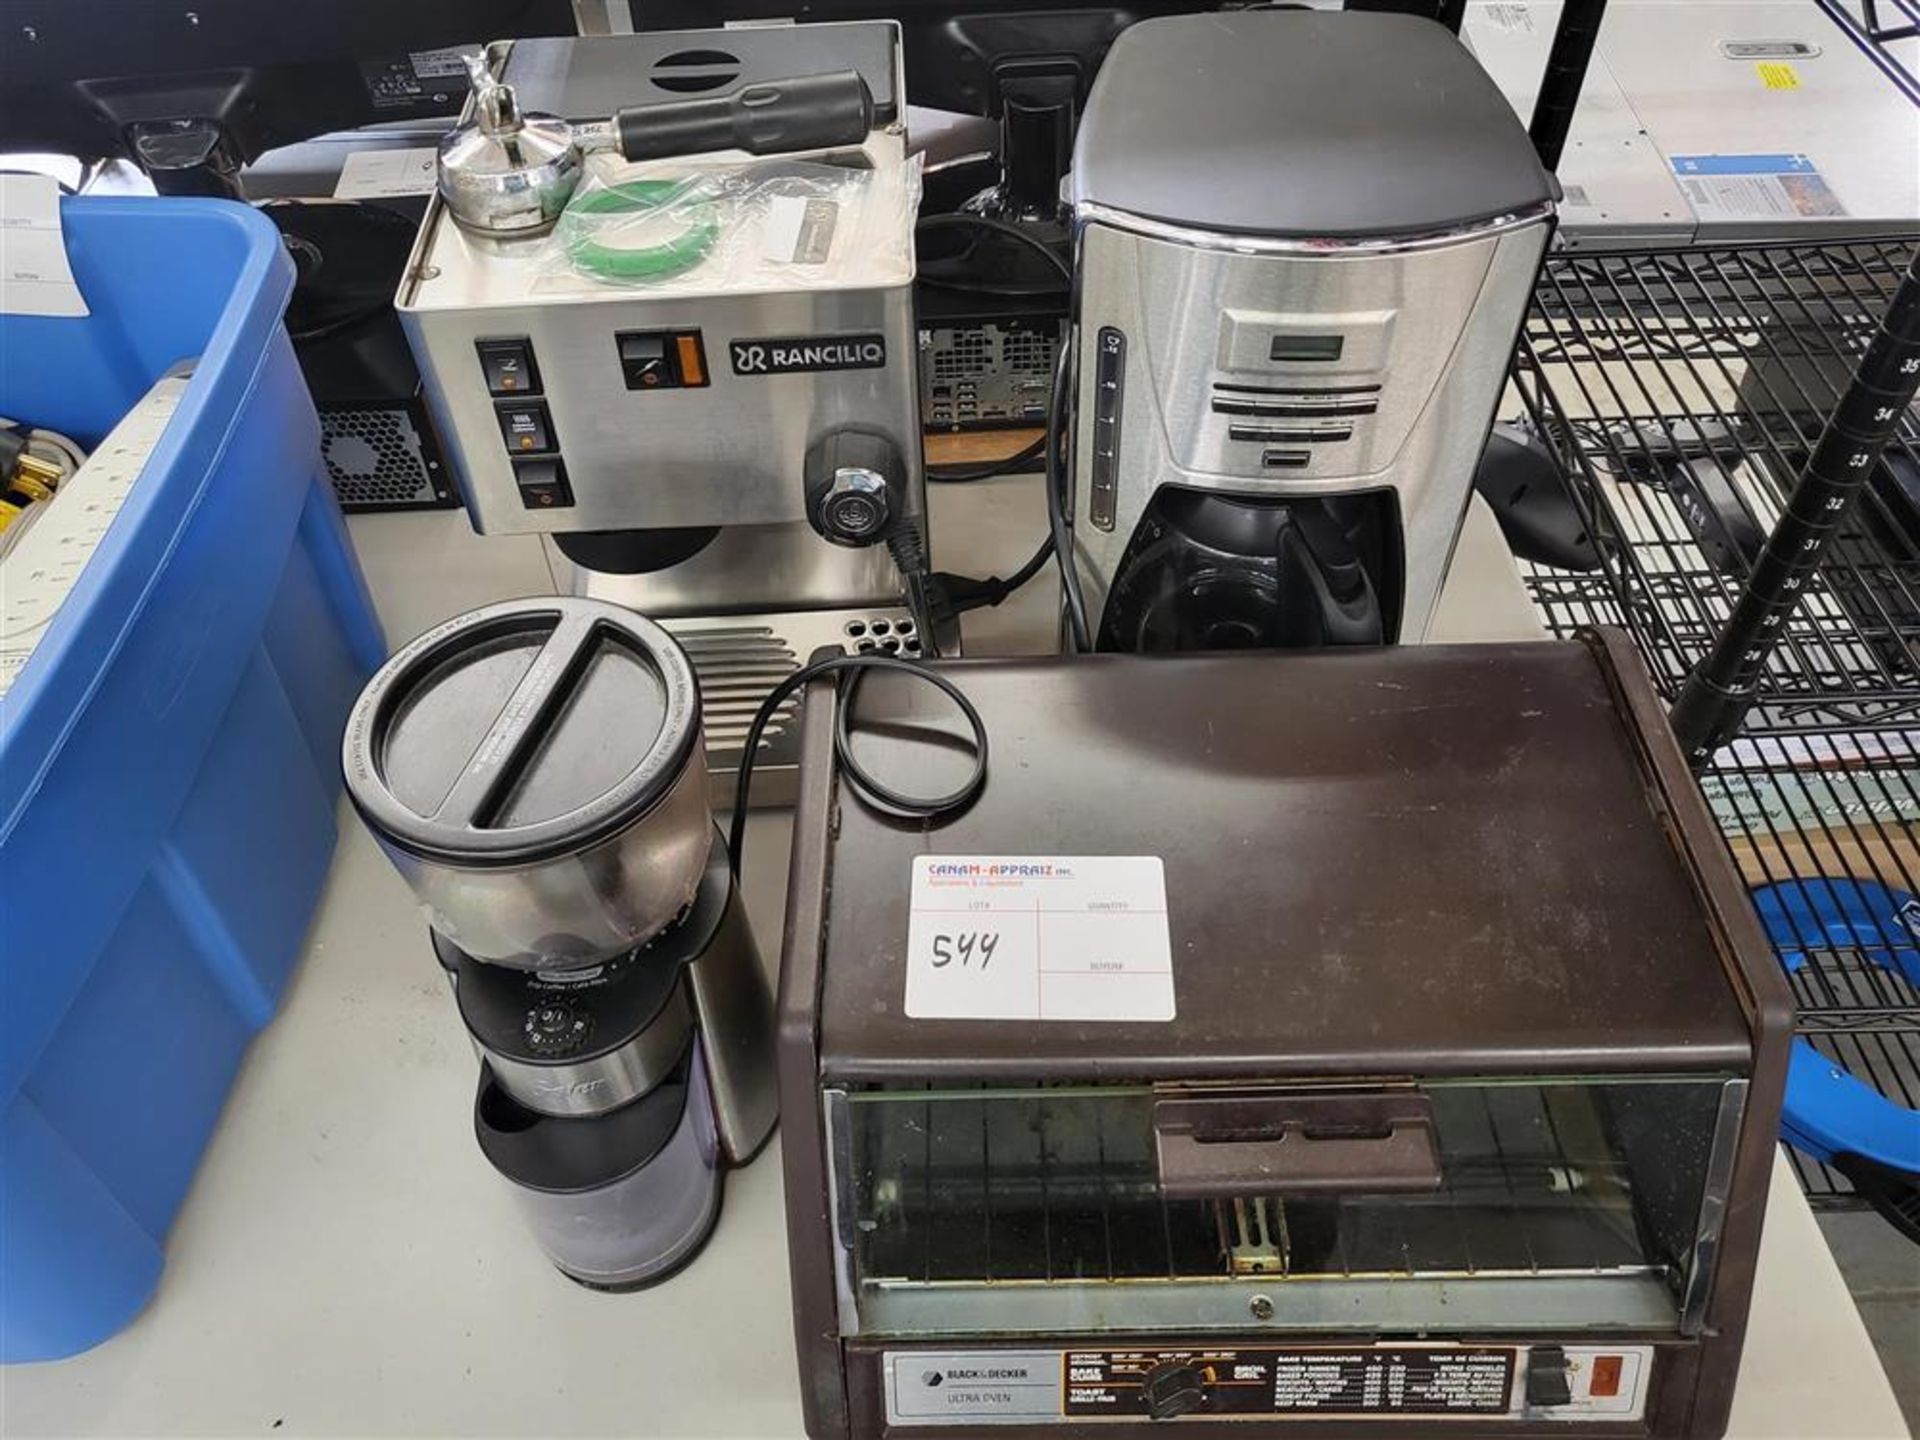 Mixed Lot of Assorted Kitchen Equipment - Toaster, Cofee Makers, Espresso Machine